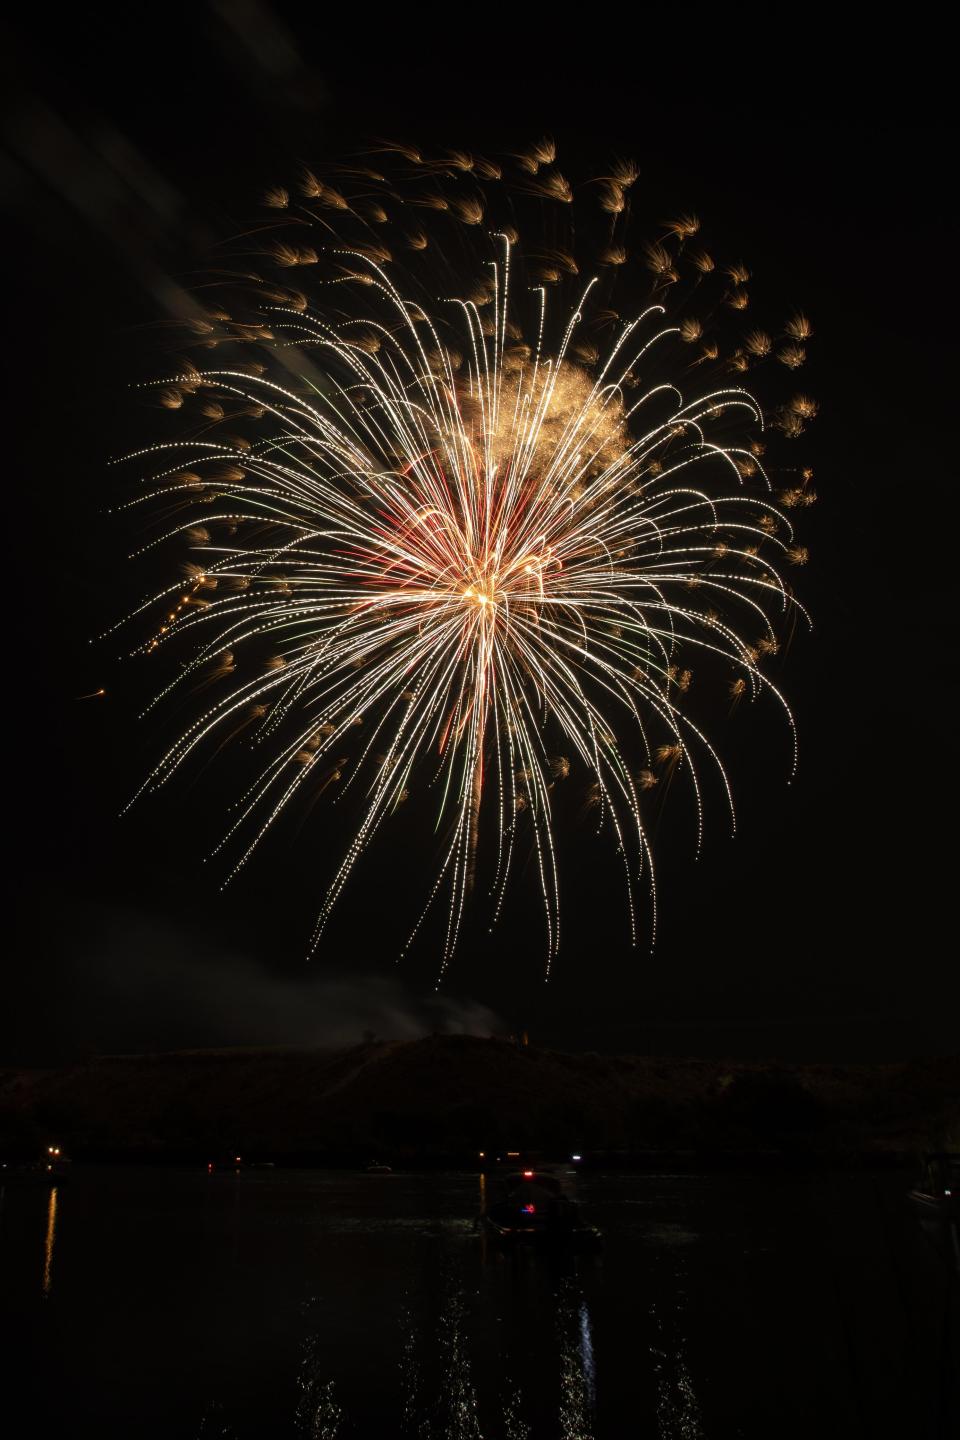 Fireworks go off over Buffalo Springs Lake for the annual fireworks show to celebrate the Fourth of July on Friday, July 3, 2020, in Buffalo Springs, Texas.